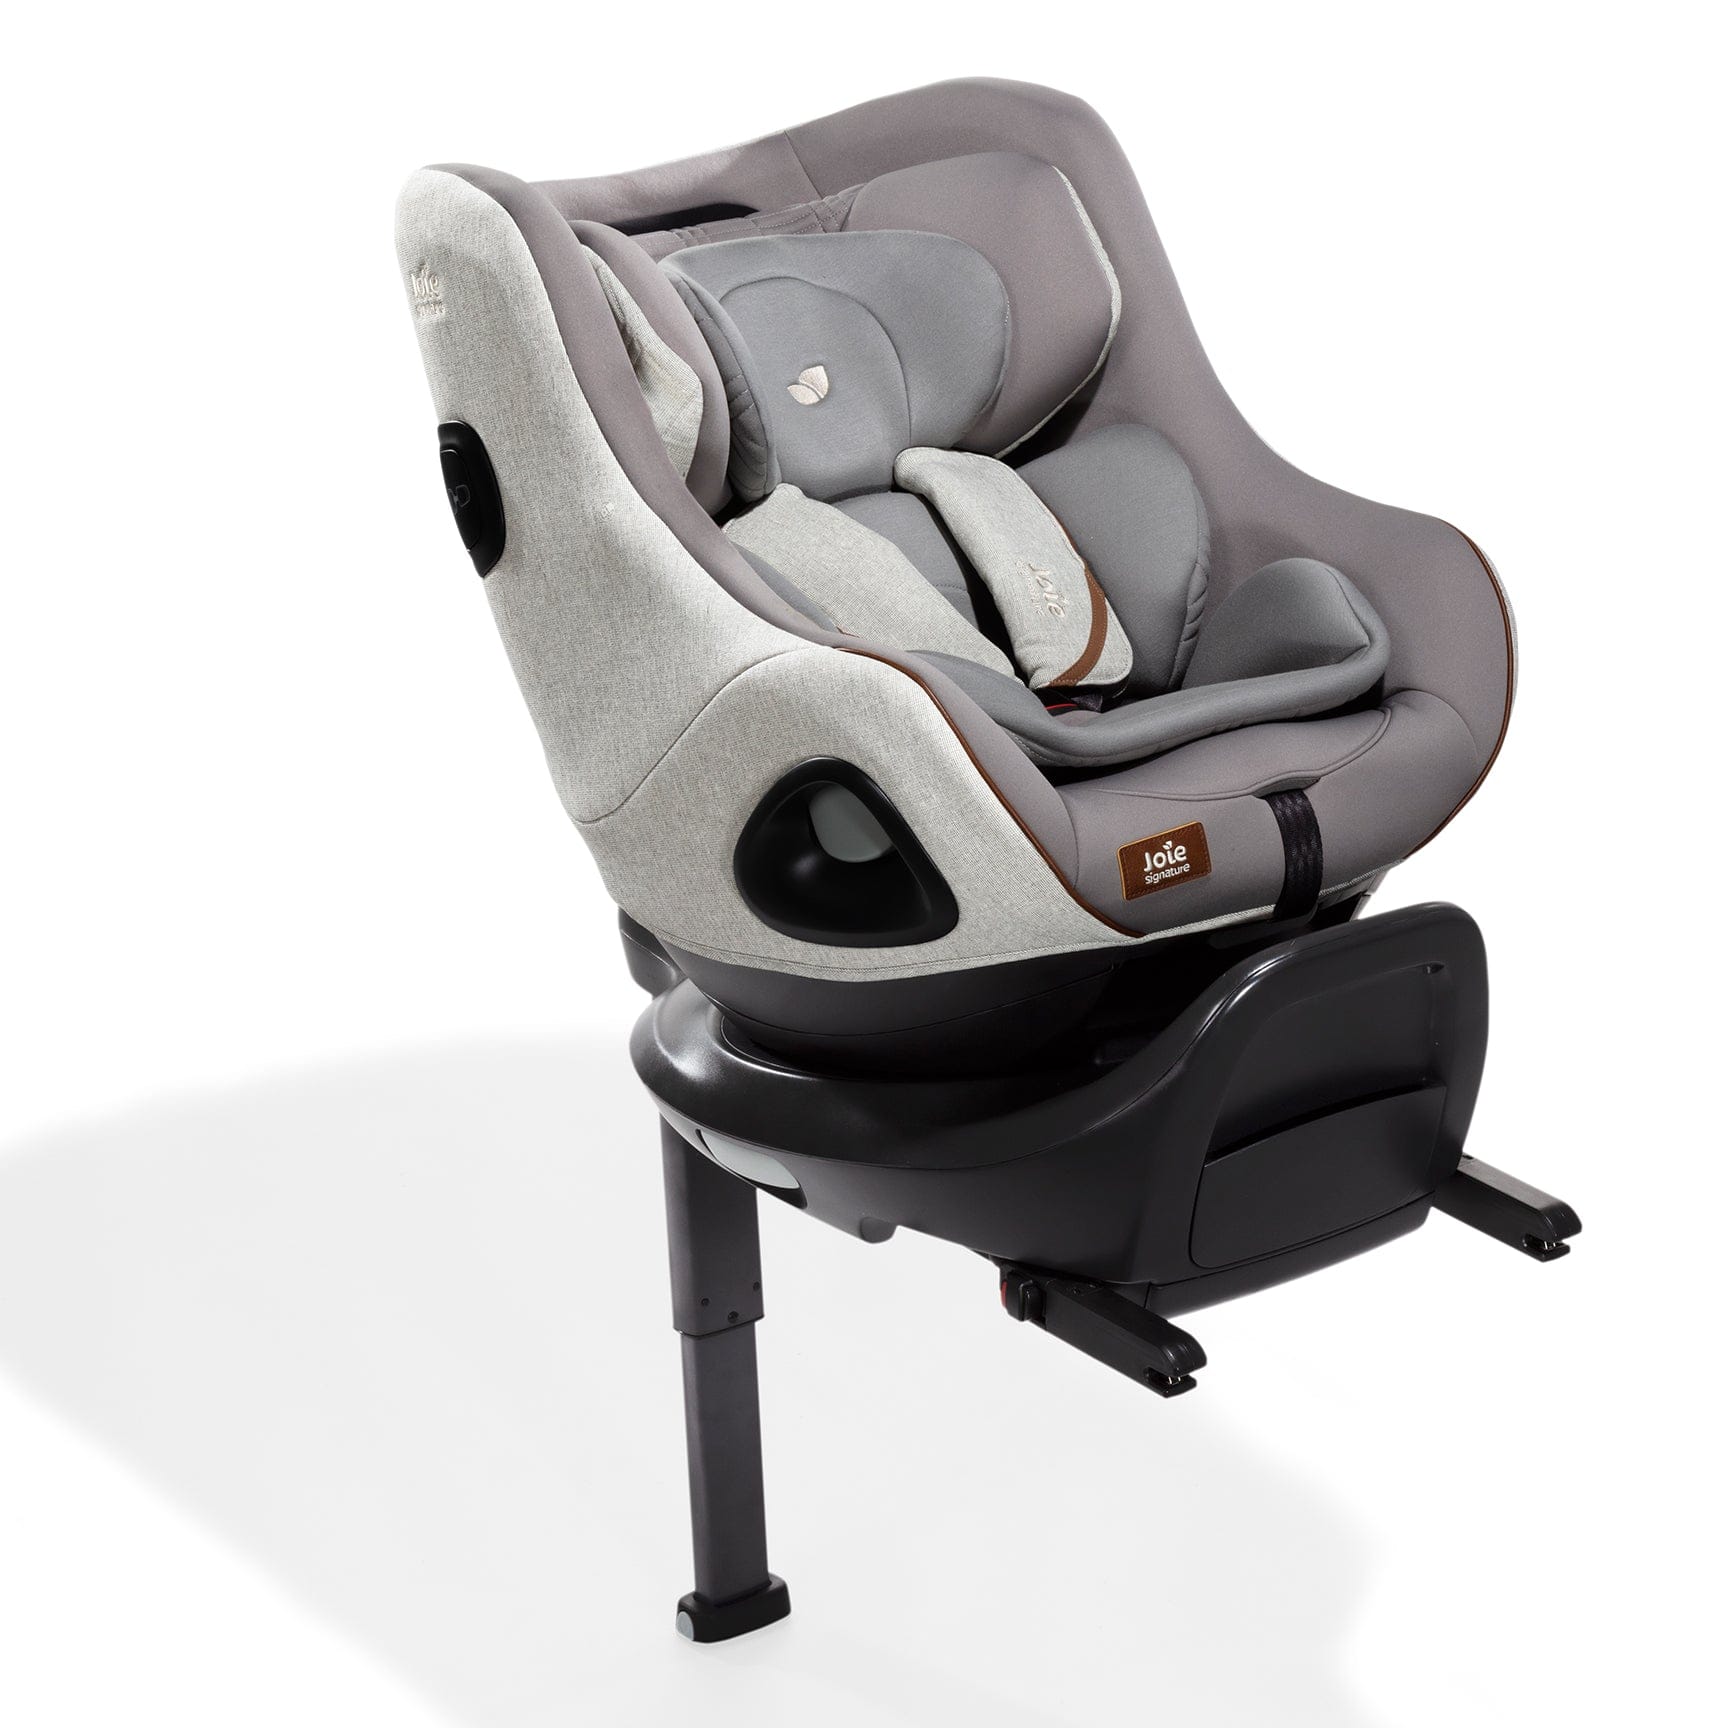 Joie i-Harbour and i-Base Encore in Oyster Swivel Car Seats 12221-OYS 5056080612461